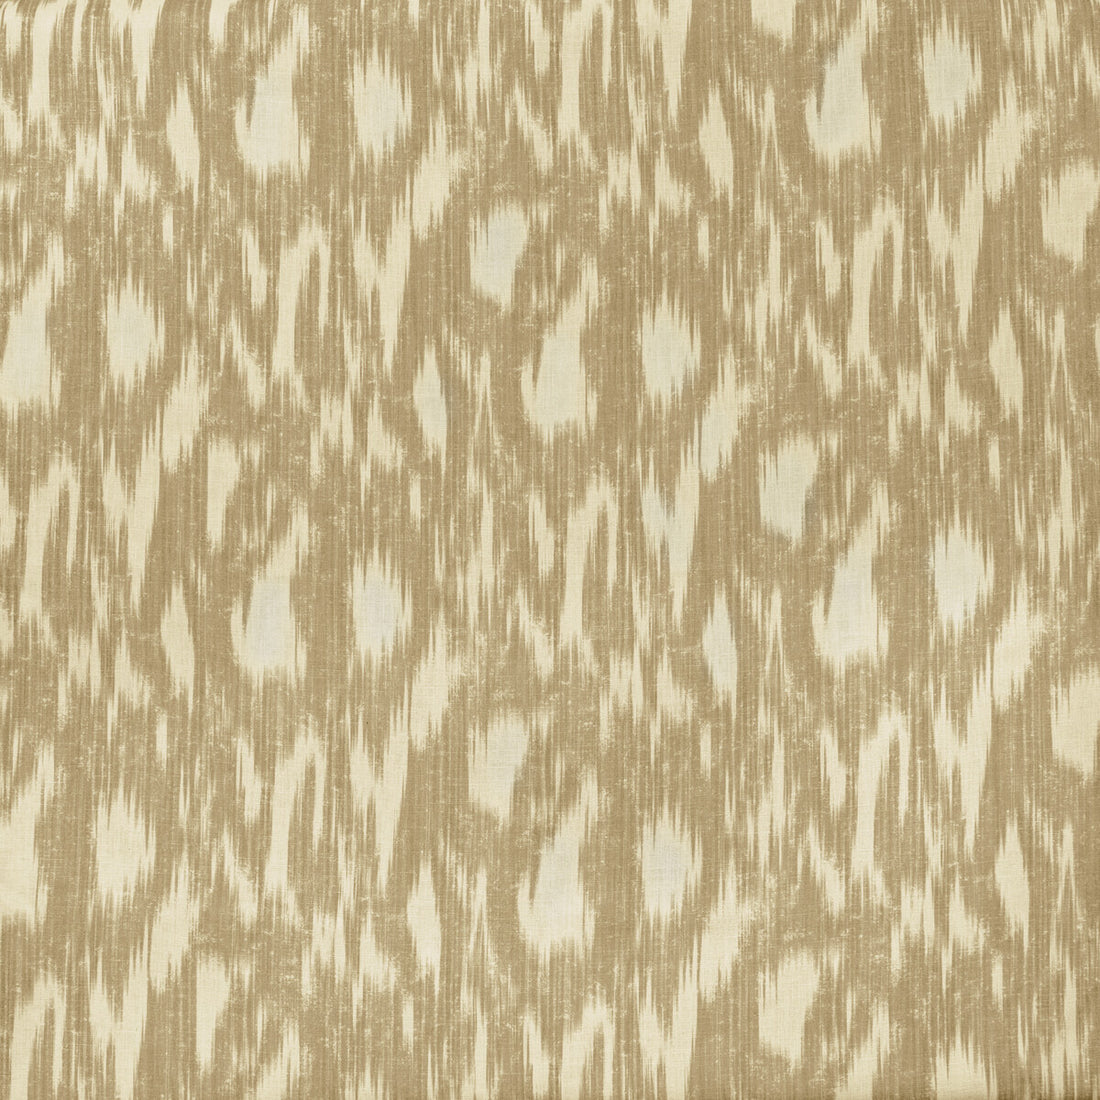 Apulia fabric in almond color - pattern AM100324.16.0 - by Kravet Couture in the Andrew Martin Salento collection